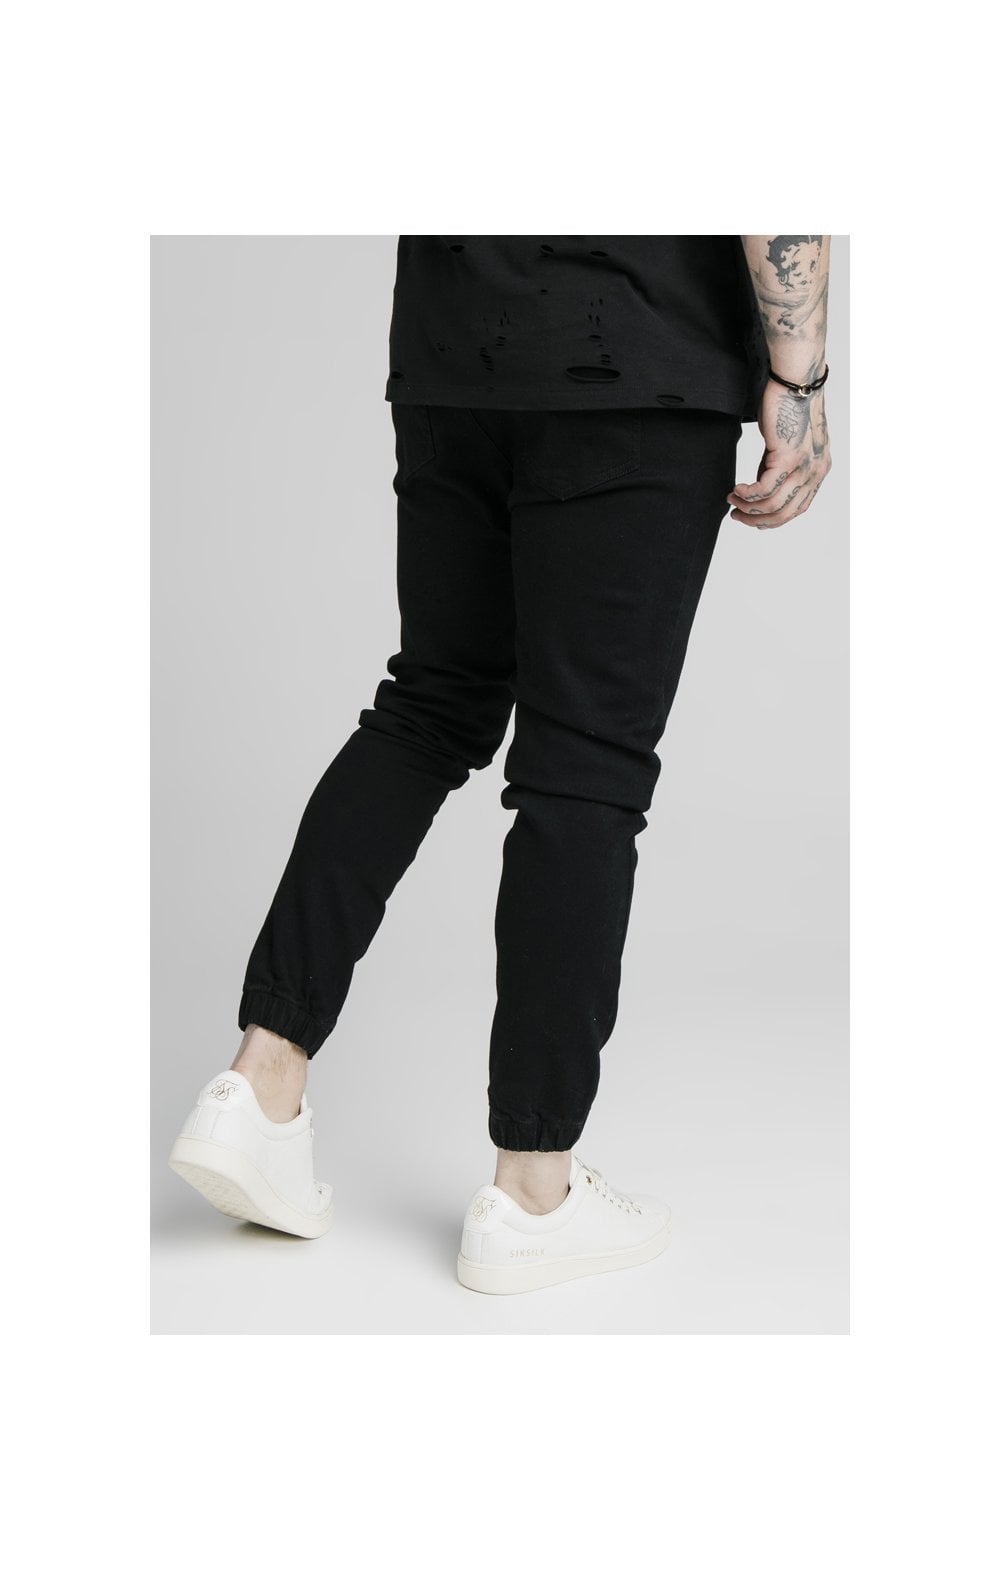 SikSilk Elasticated Cuff Pleated Jeans Pants - Washed Black (5)